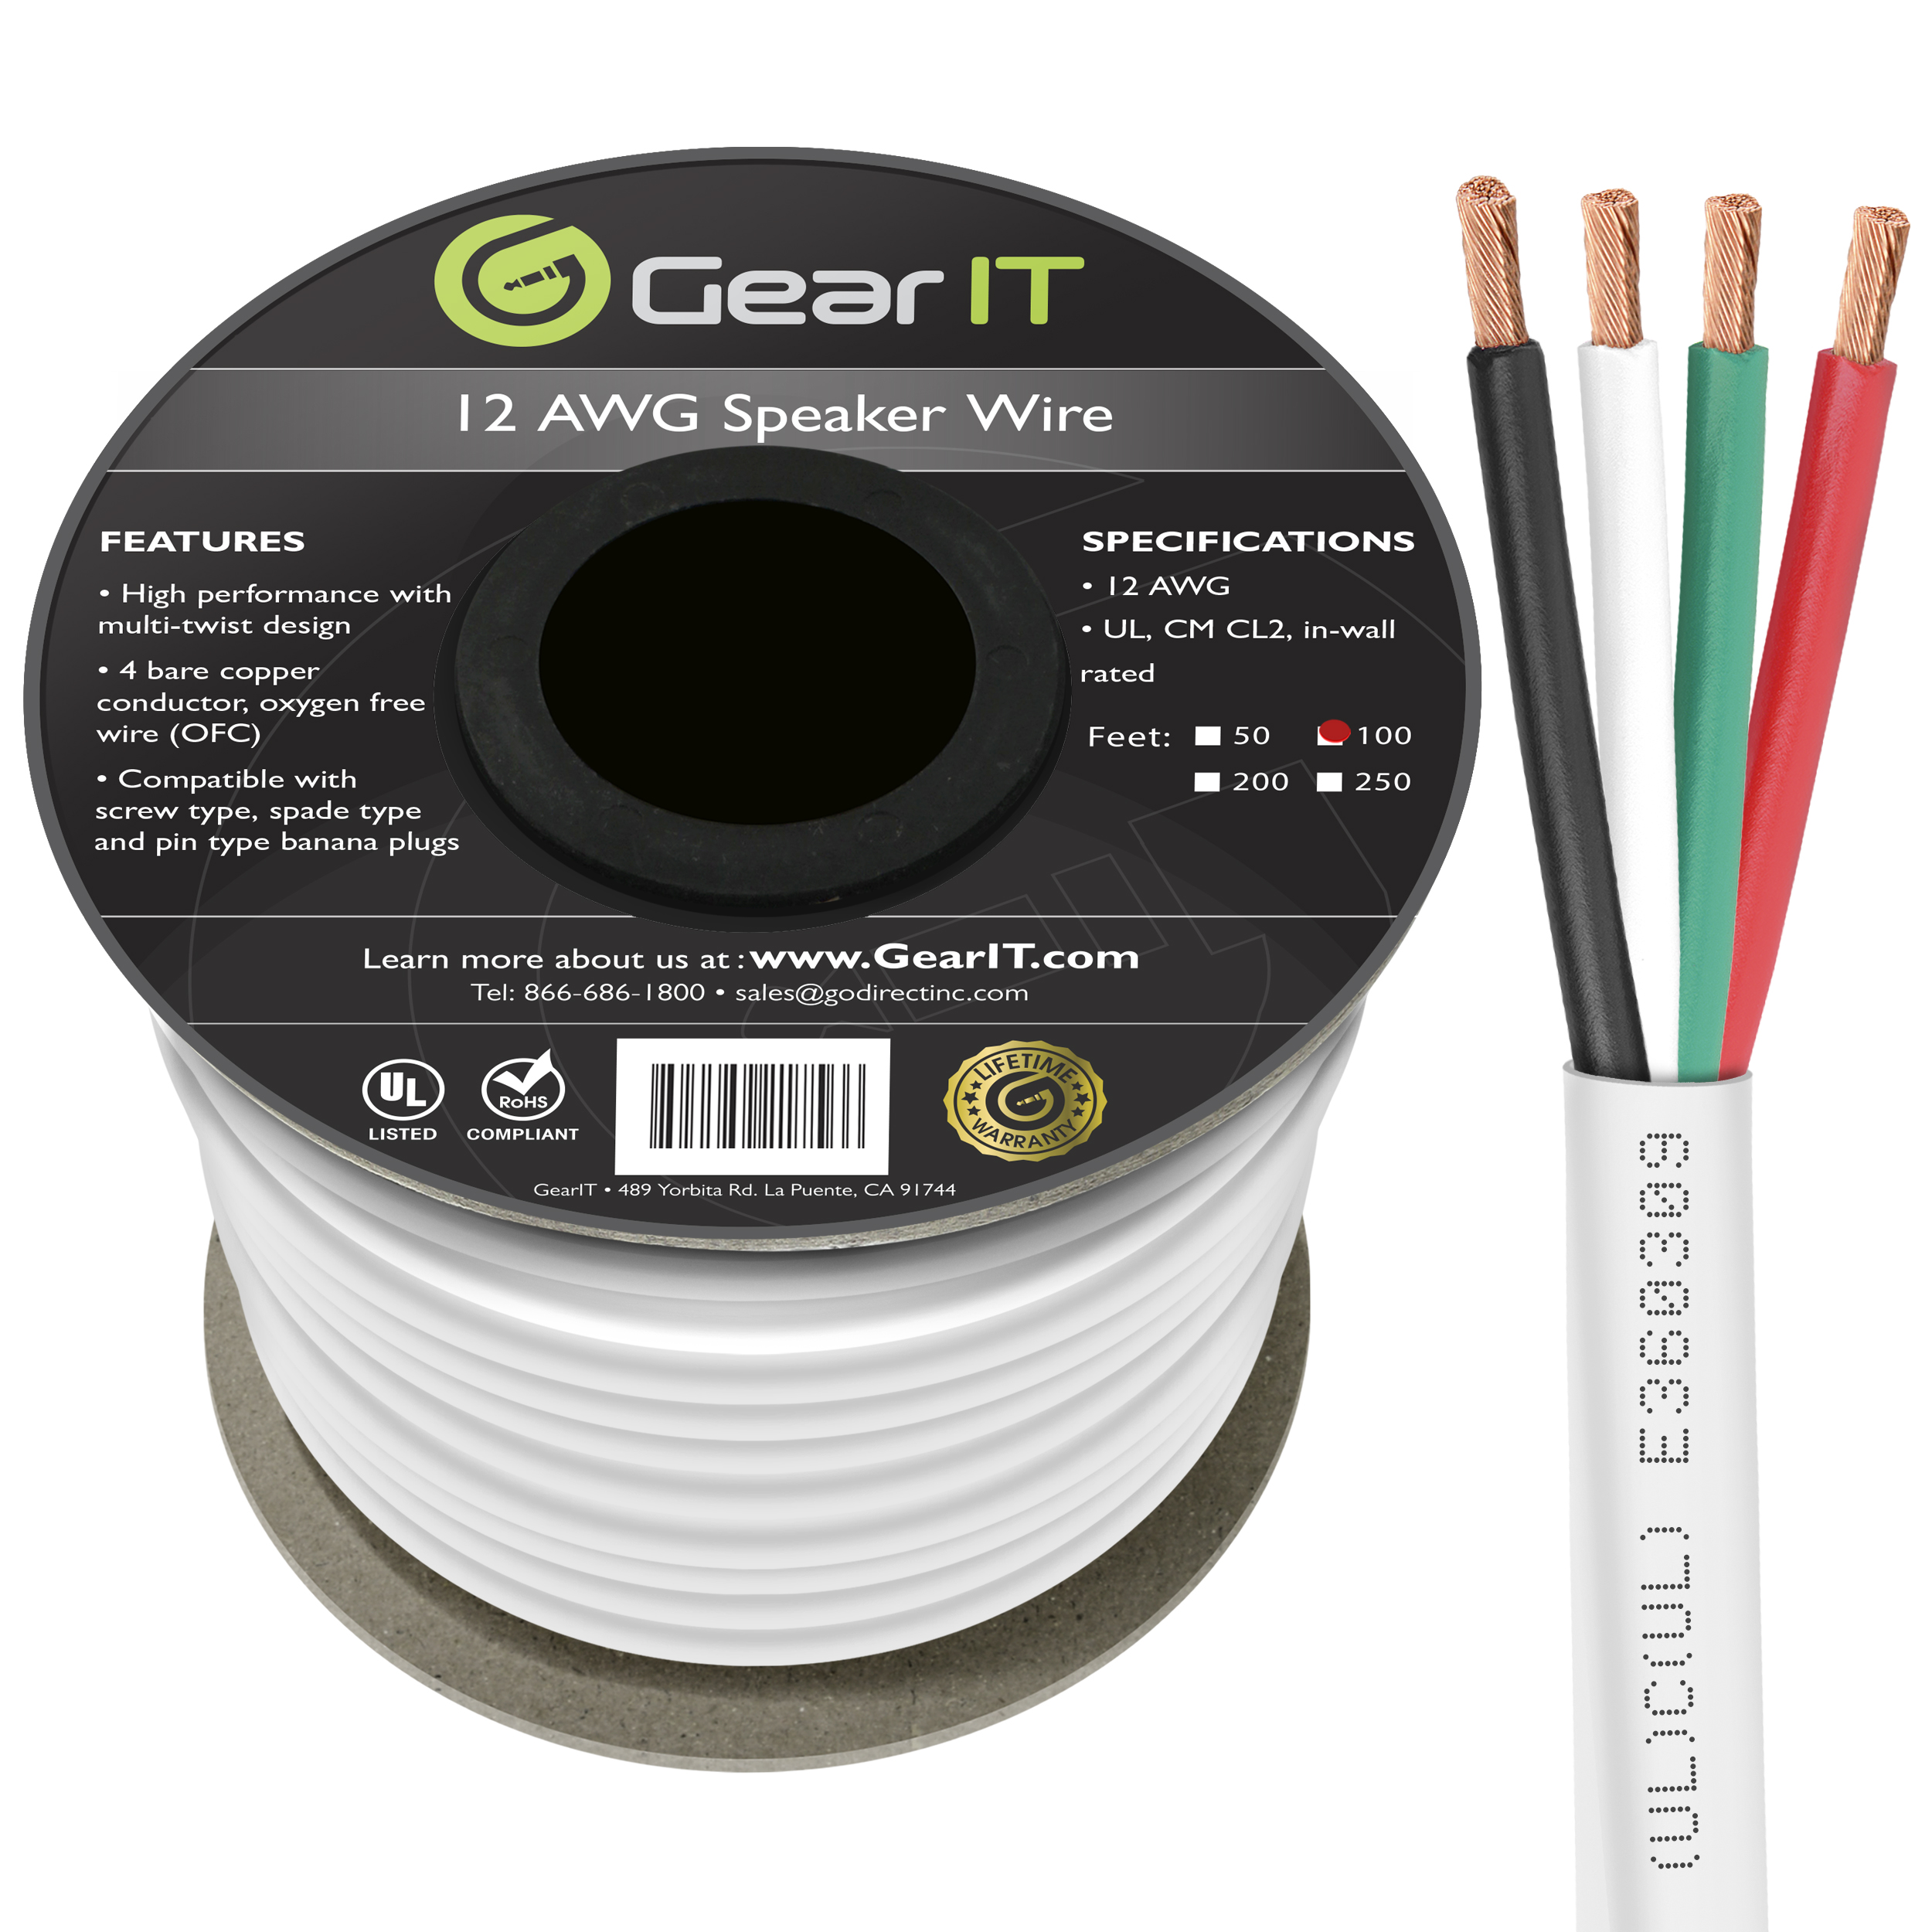 GearIT Pro Series 4-Conductor Speaker Wire OFC (99.9% Oxygen Free Copper) Speaker Wire CL2 Rated for In-Wall Speaker Cable - image 1 of 6